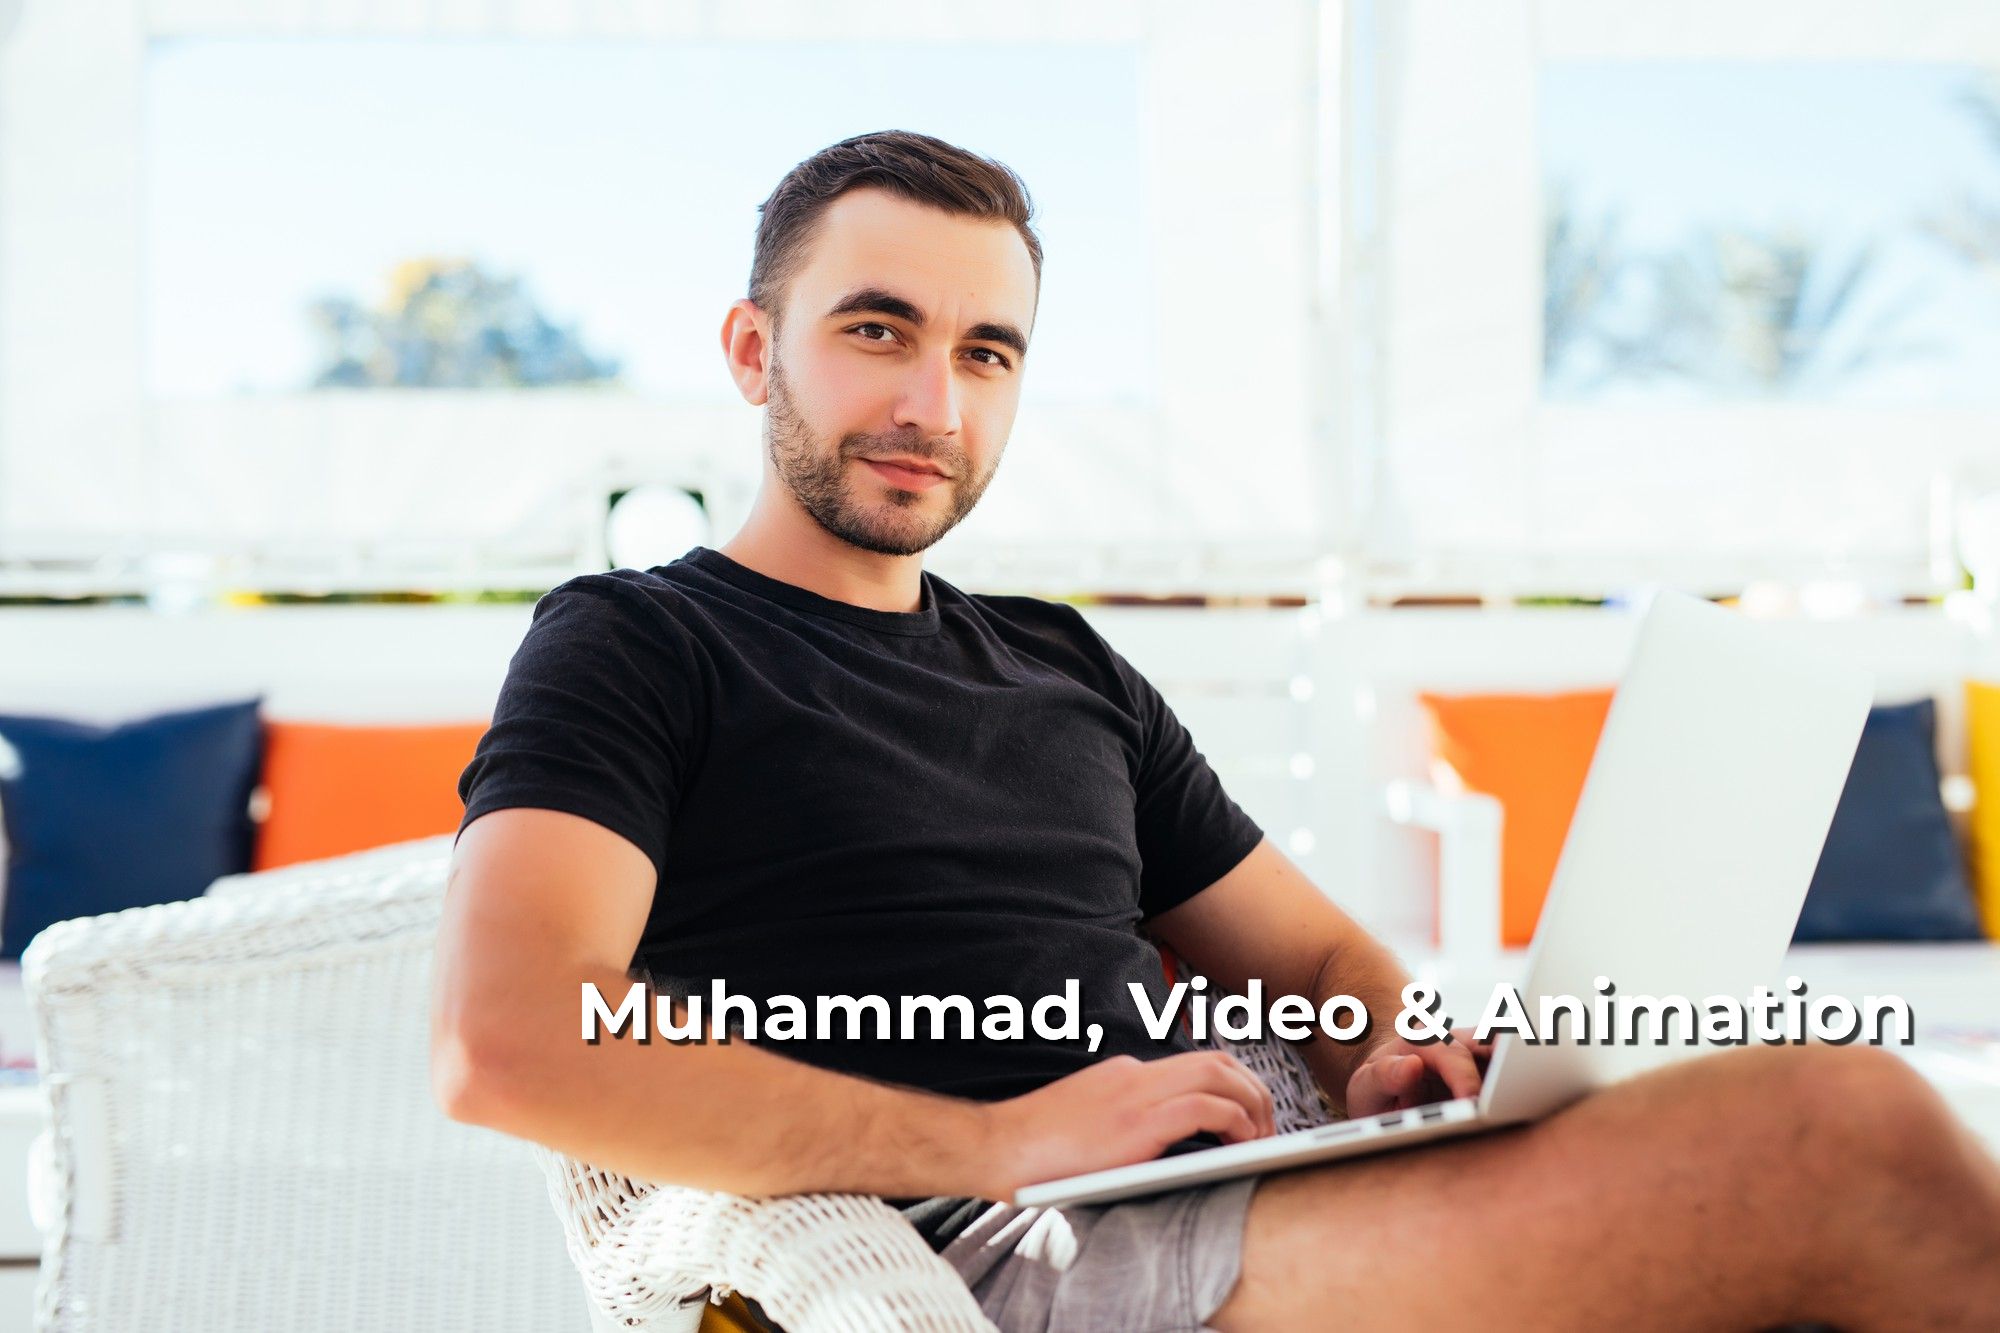 Muhammed, Video and Animation